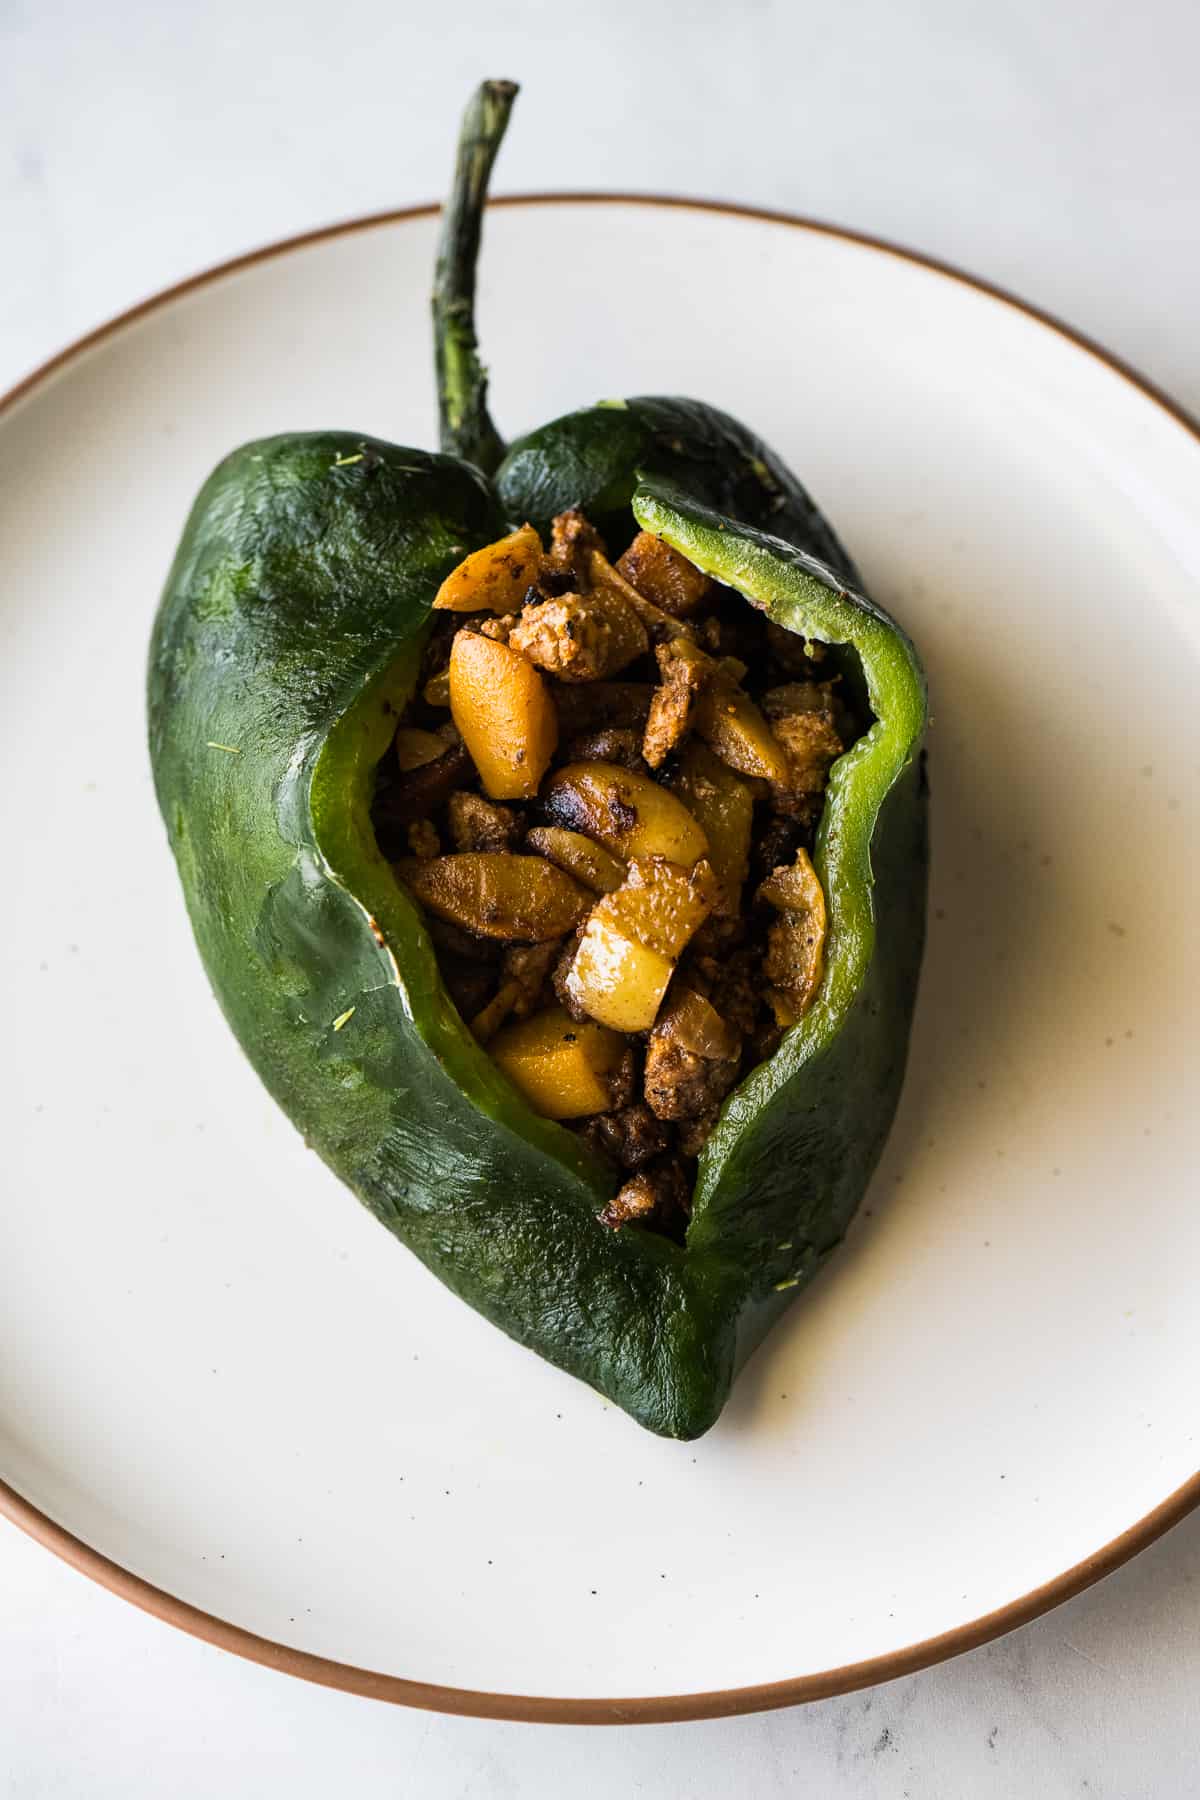 A roasted and peeled poblano pepper stuffed with chile en nogada filling.